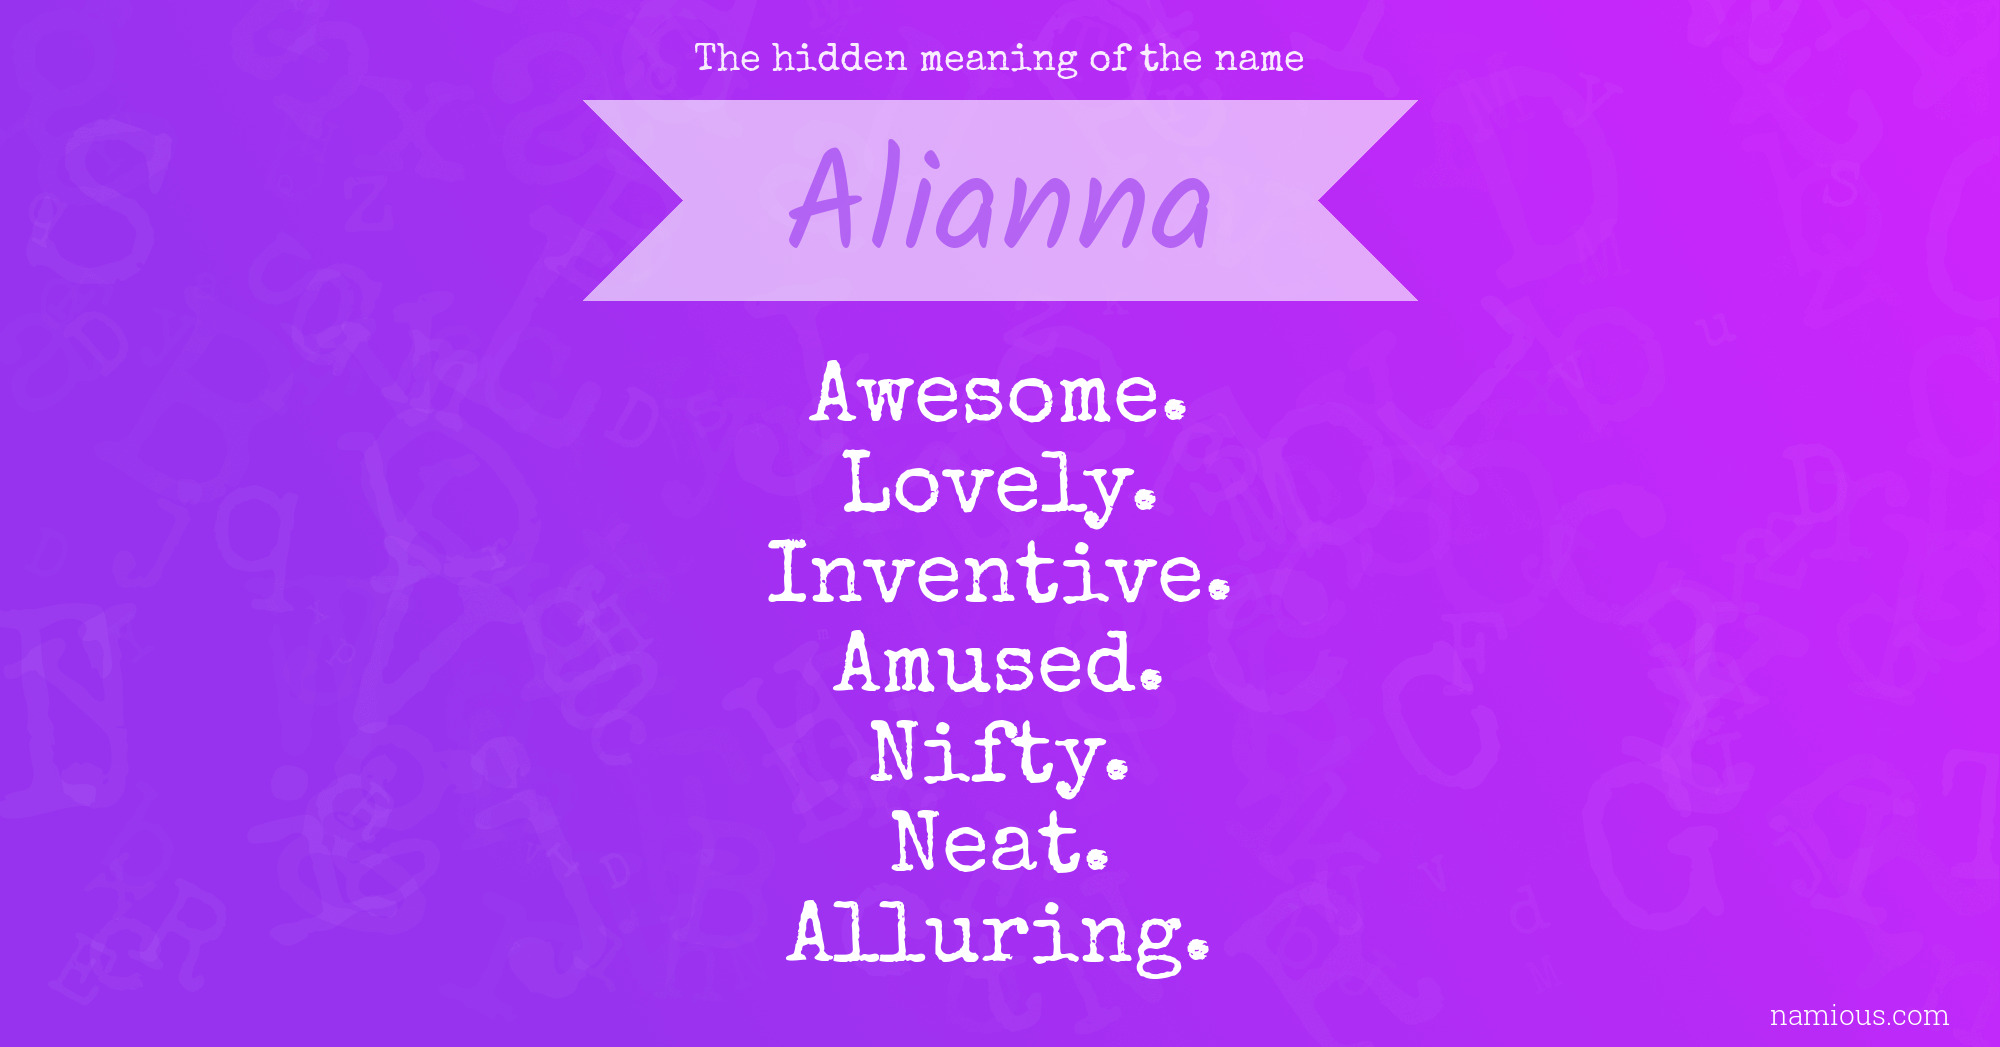 The hidden meaning of the name Alianna